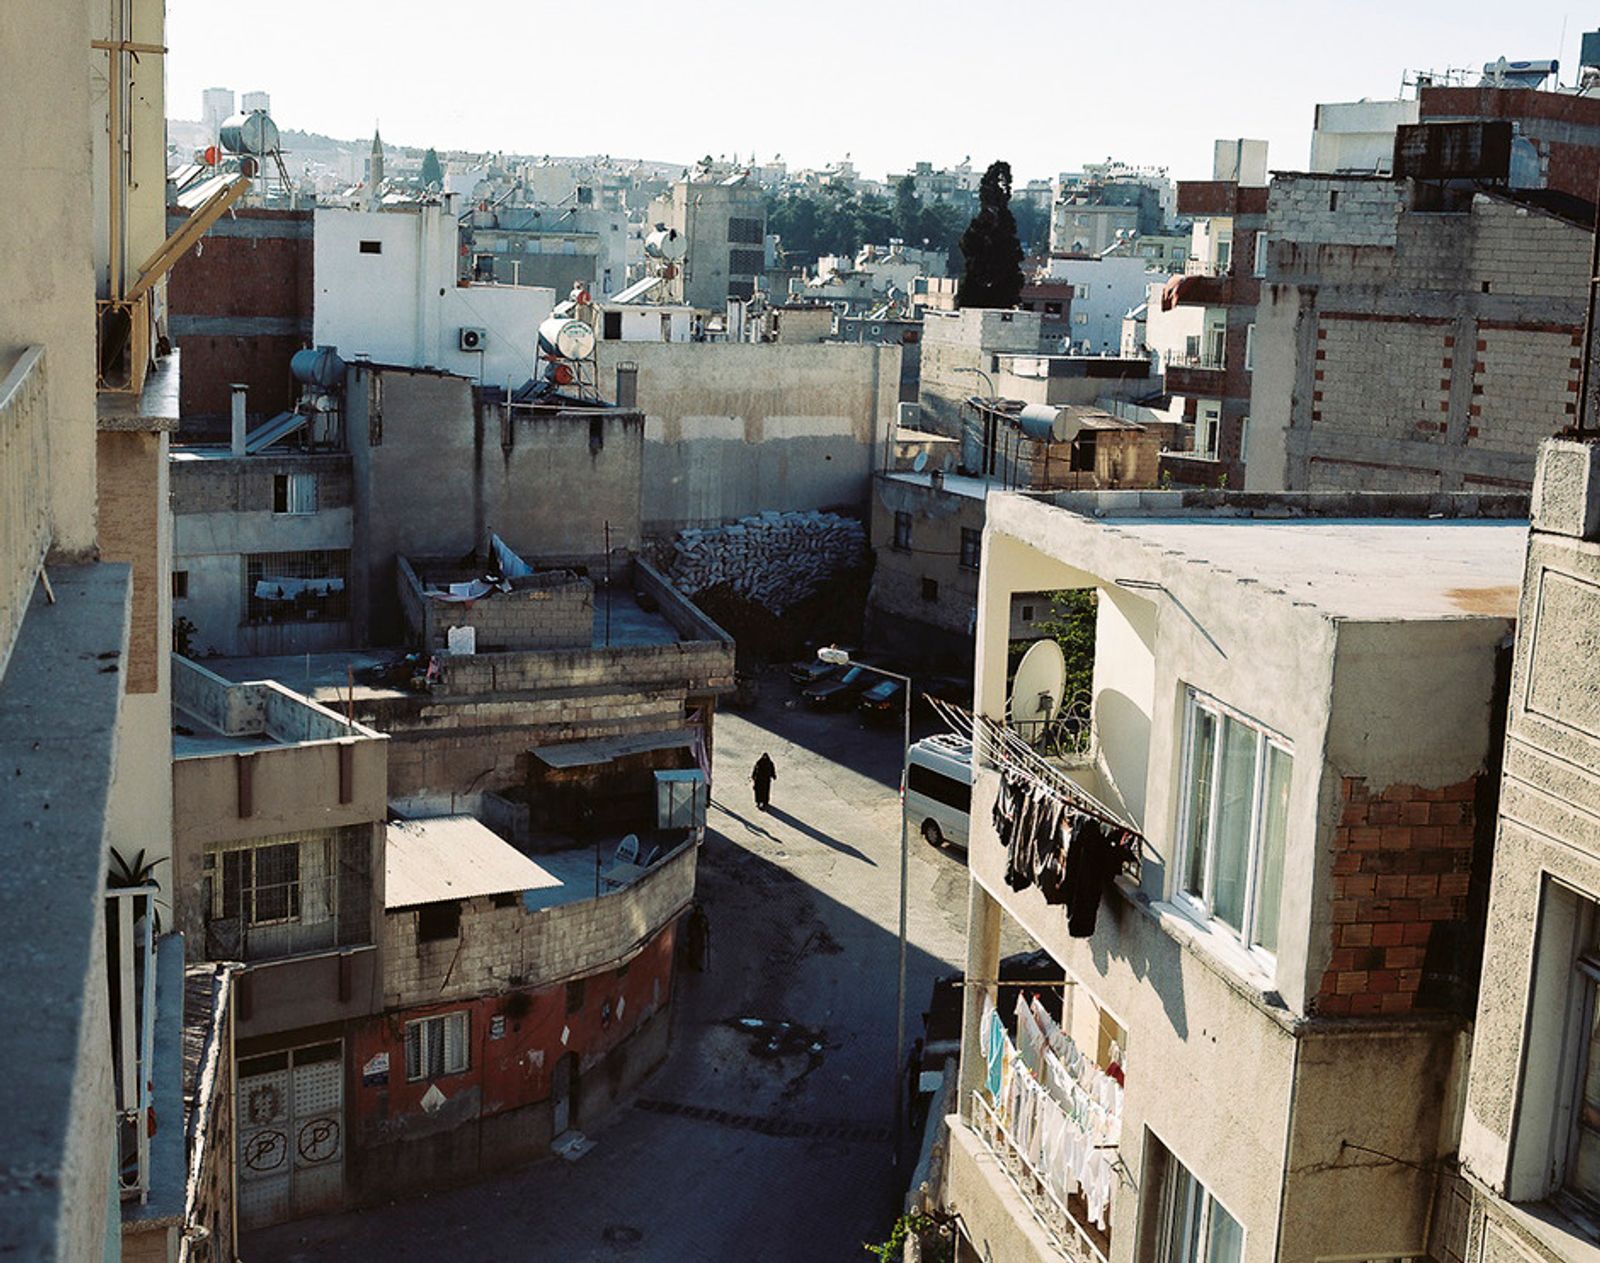 © Annie Ling - Image from the SOURIYAT: The Aftermath of the Syrian Conflict photography project